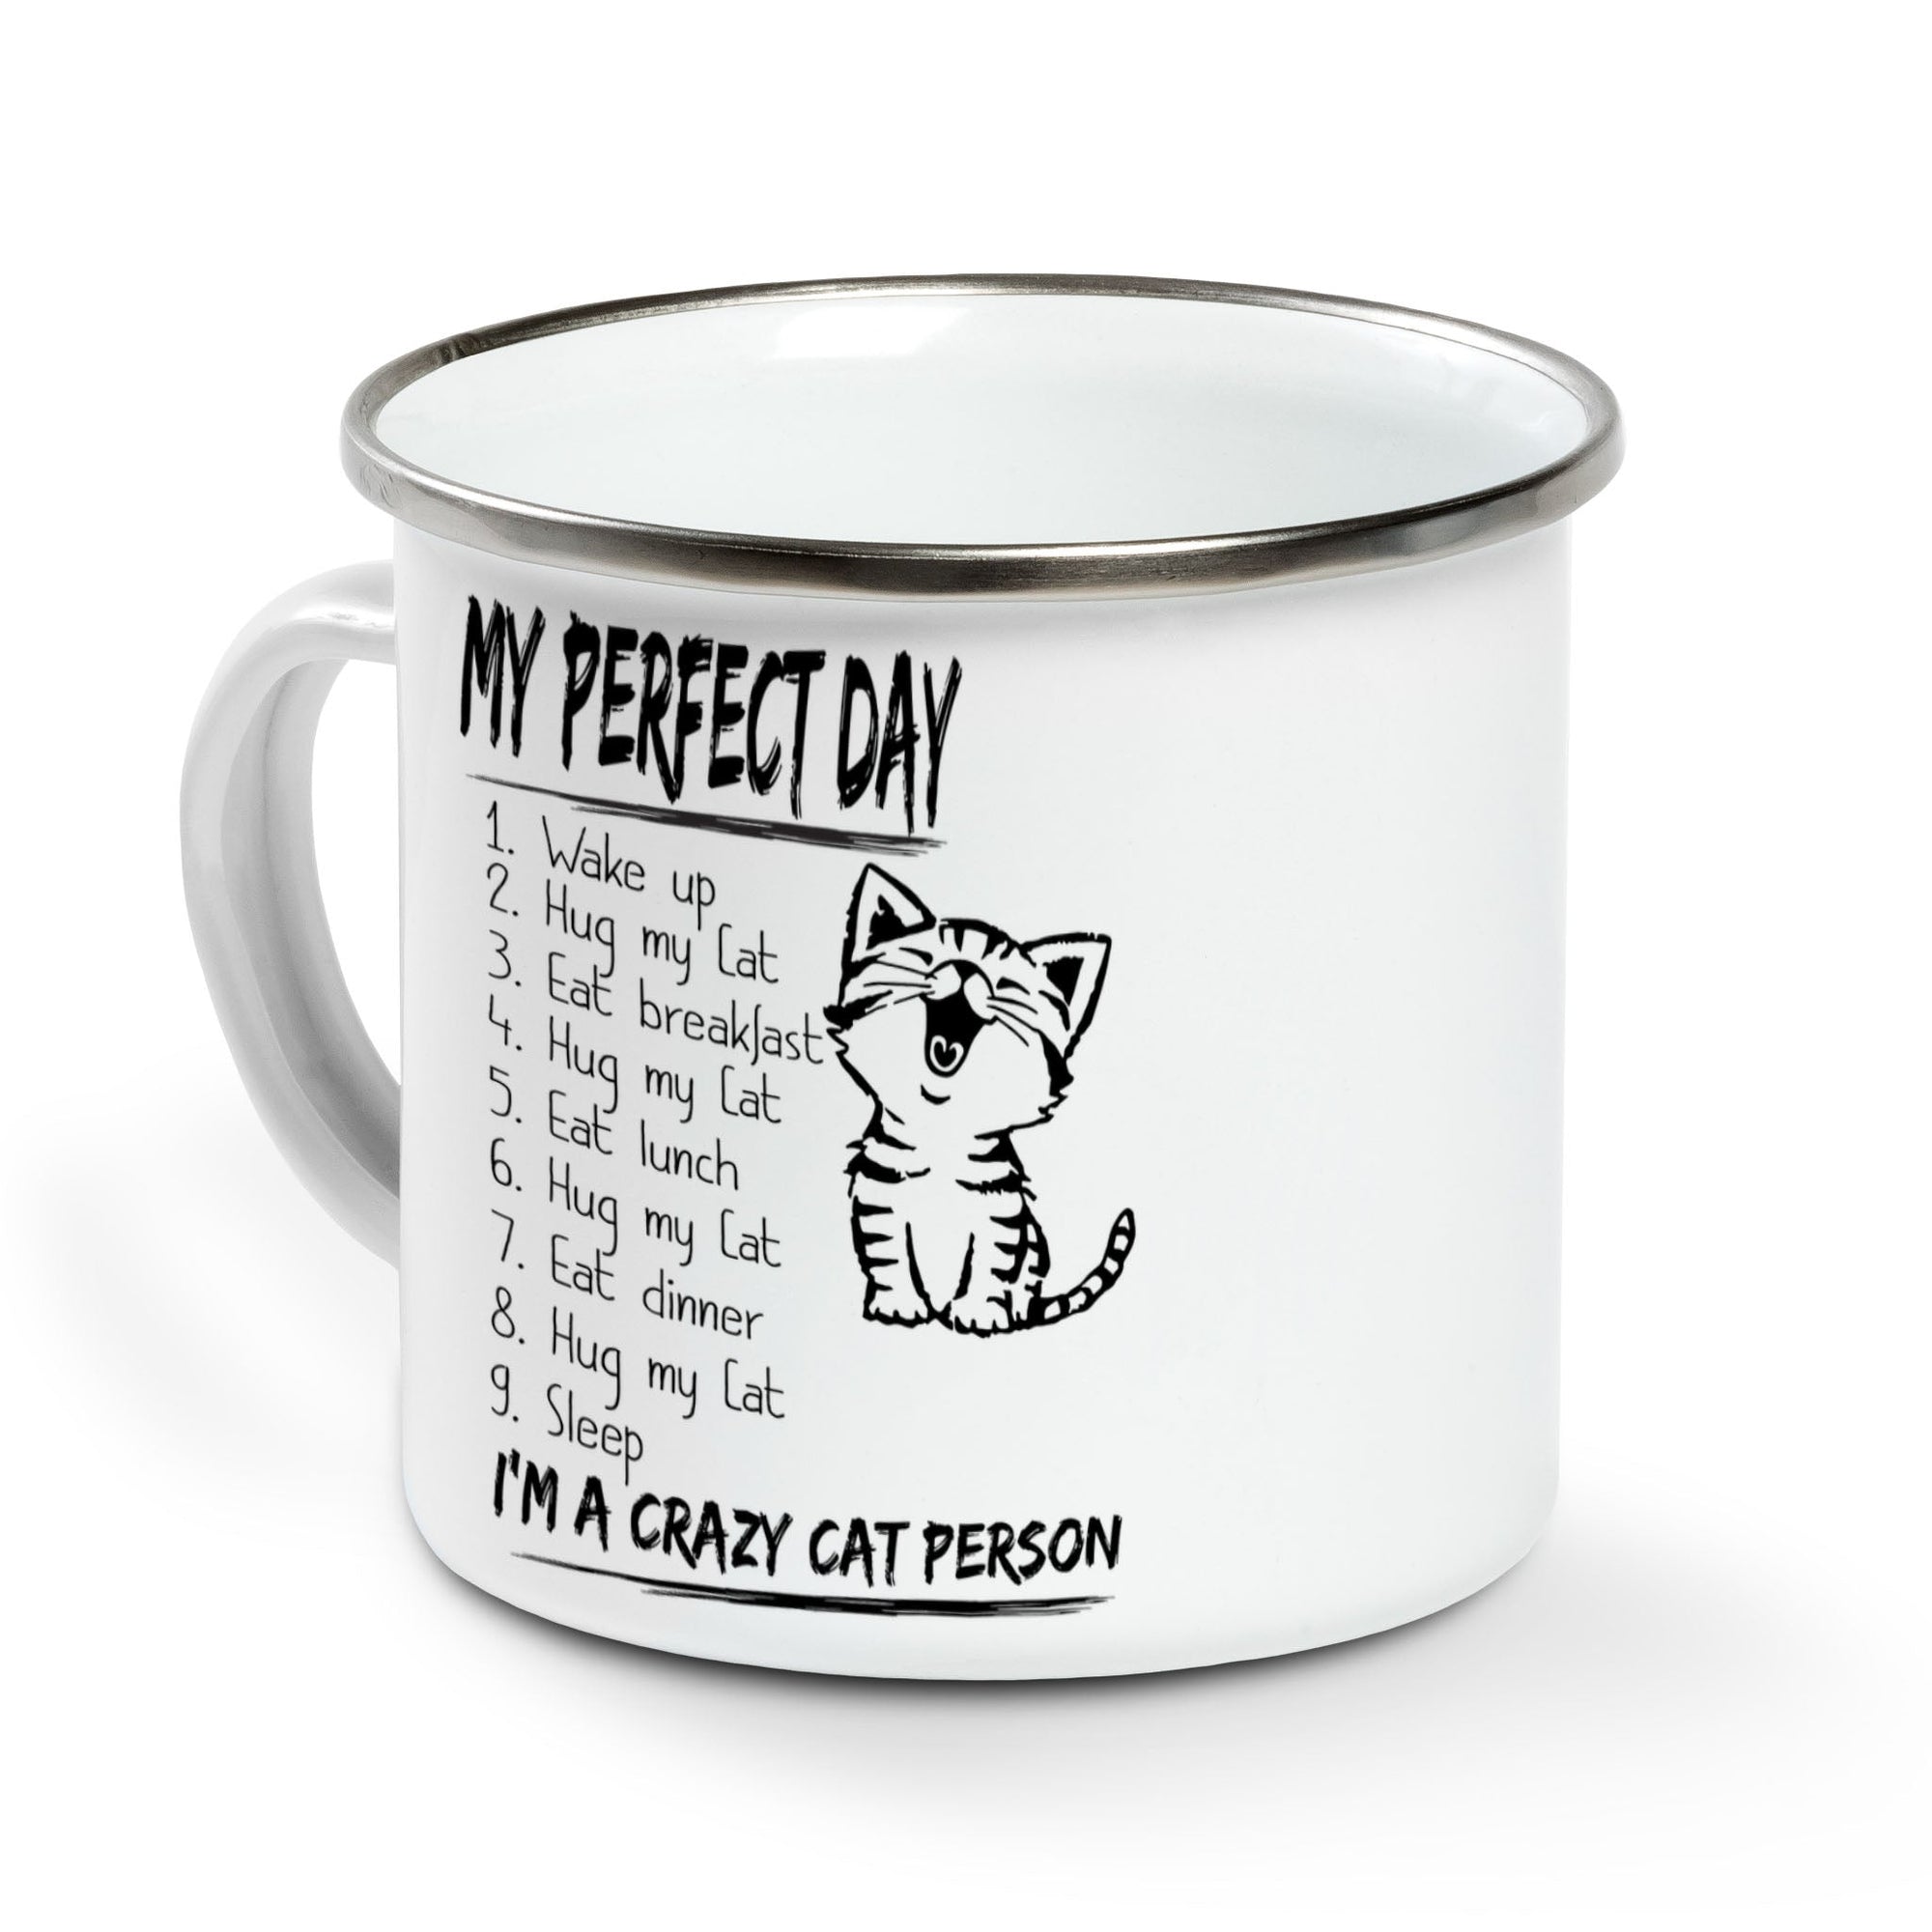 My perfect day i'm a crazy cat person Camping Mug